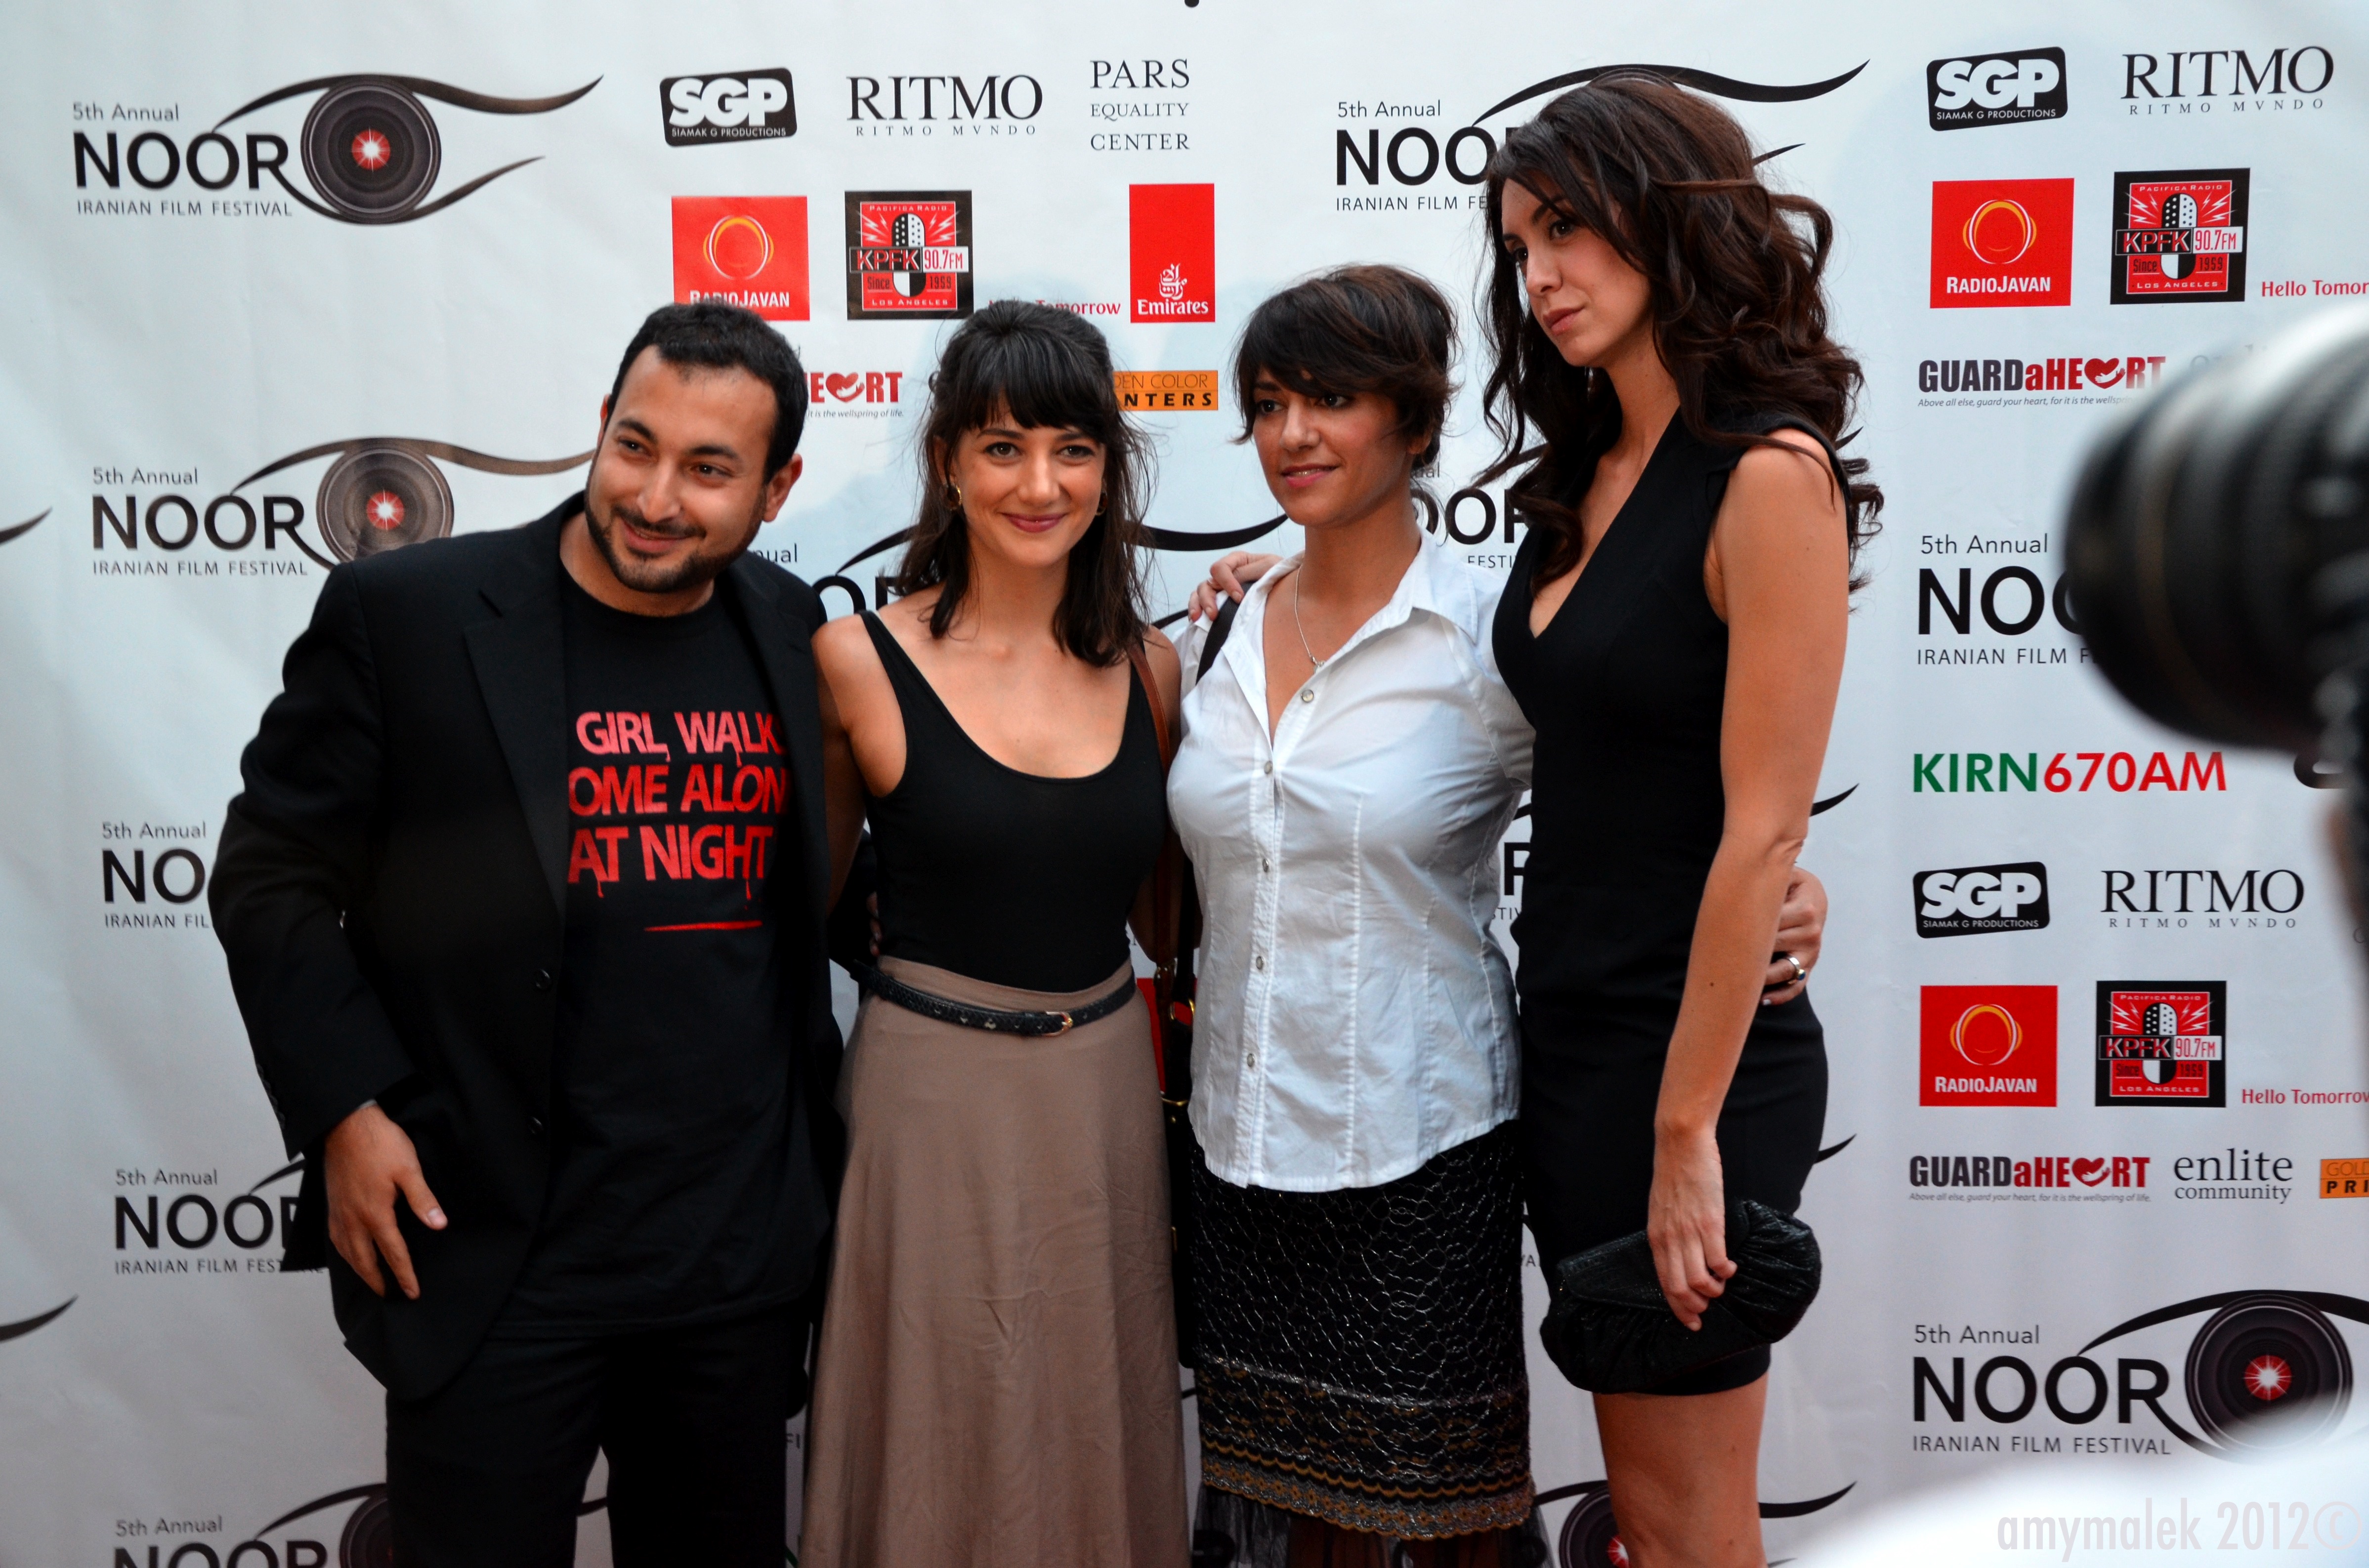 Mozhan Marno and Sheila Vand at event for Noor Film Festival